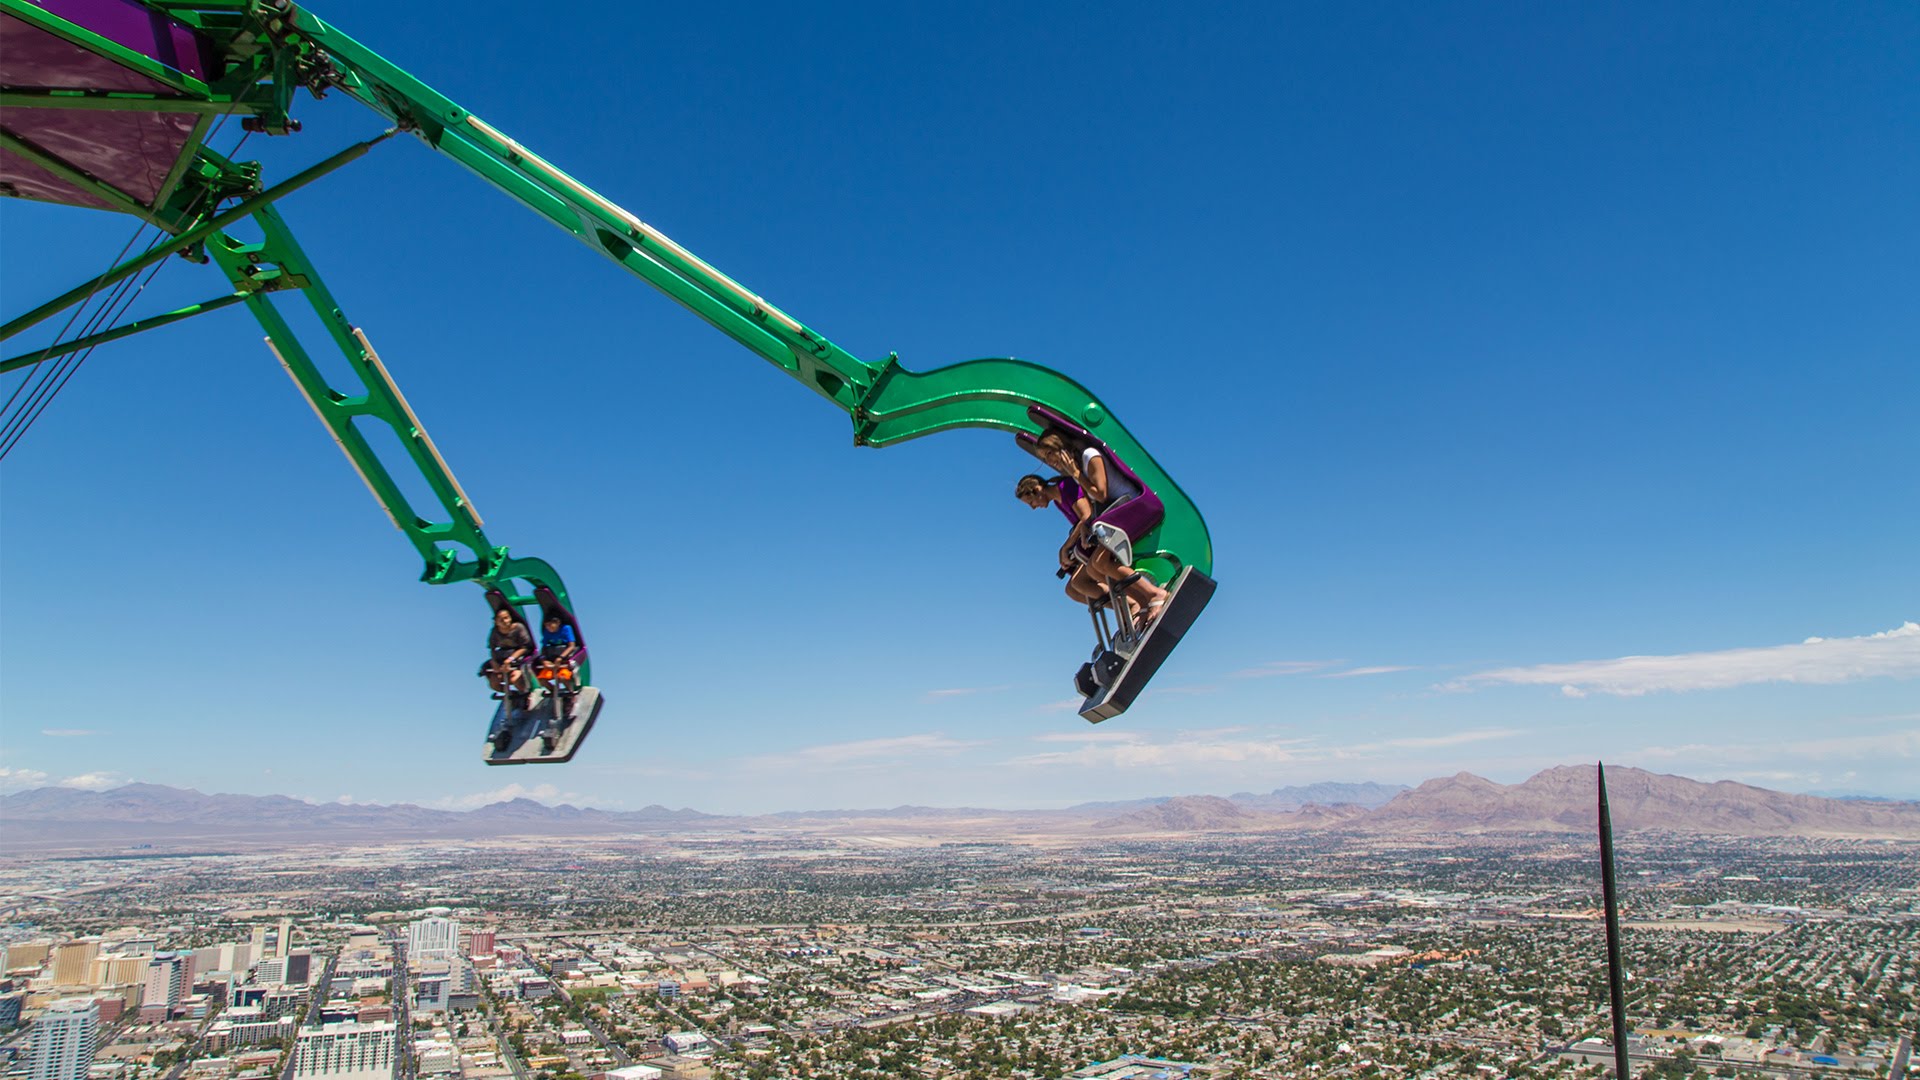 EXTREME THRILL RIDES IN LAS VEGAS (900FT HIGH) - Stratosphere ...